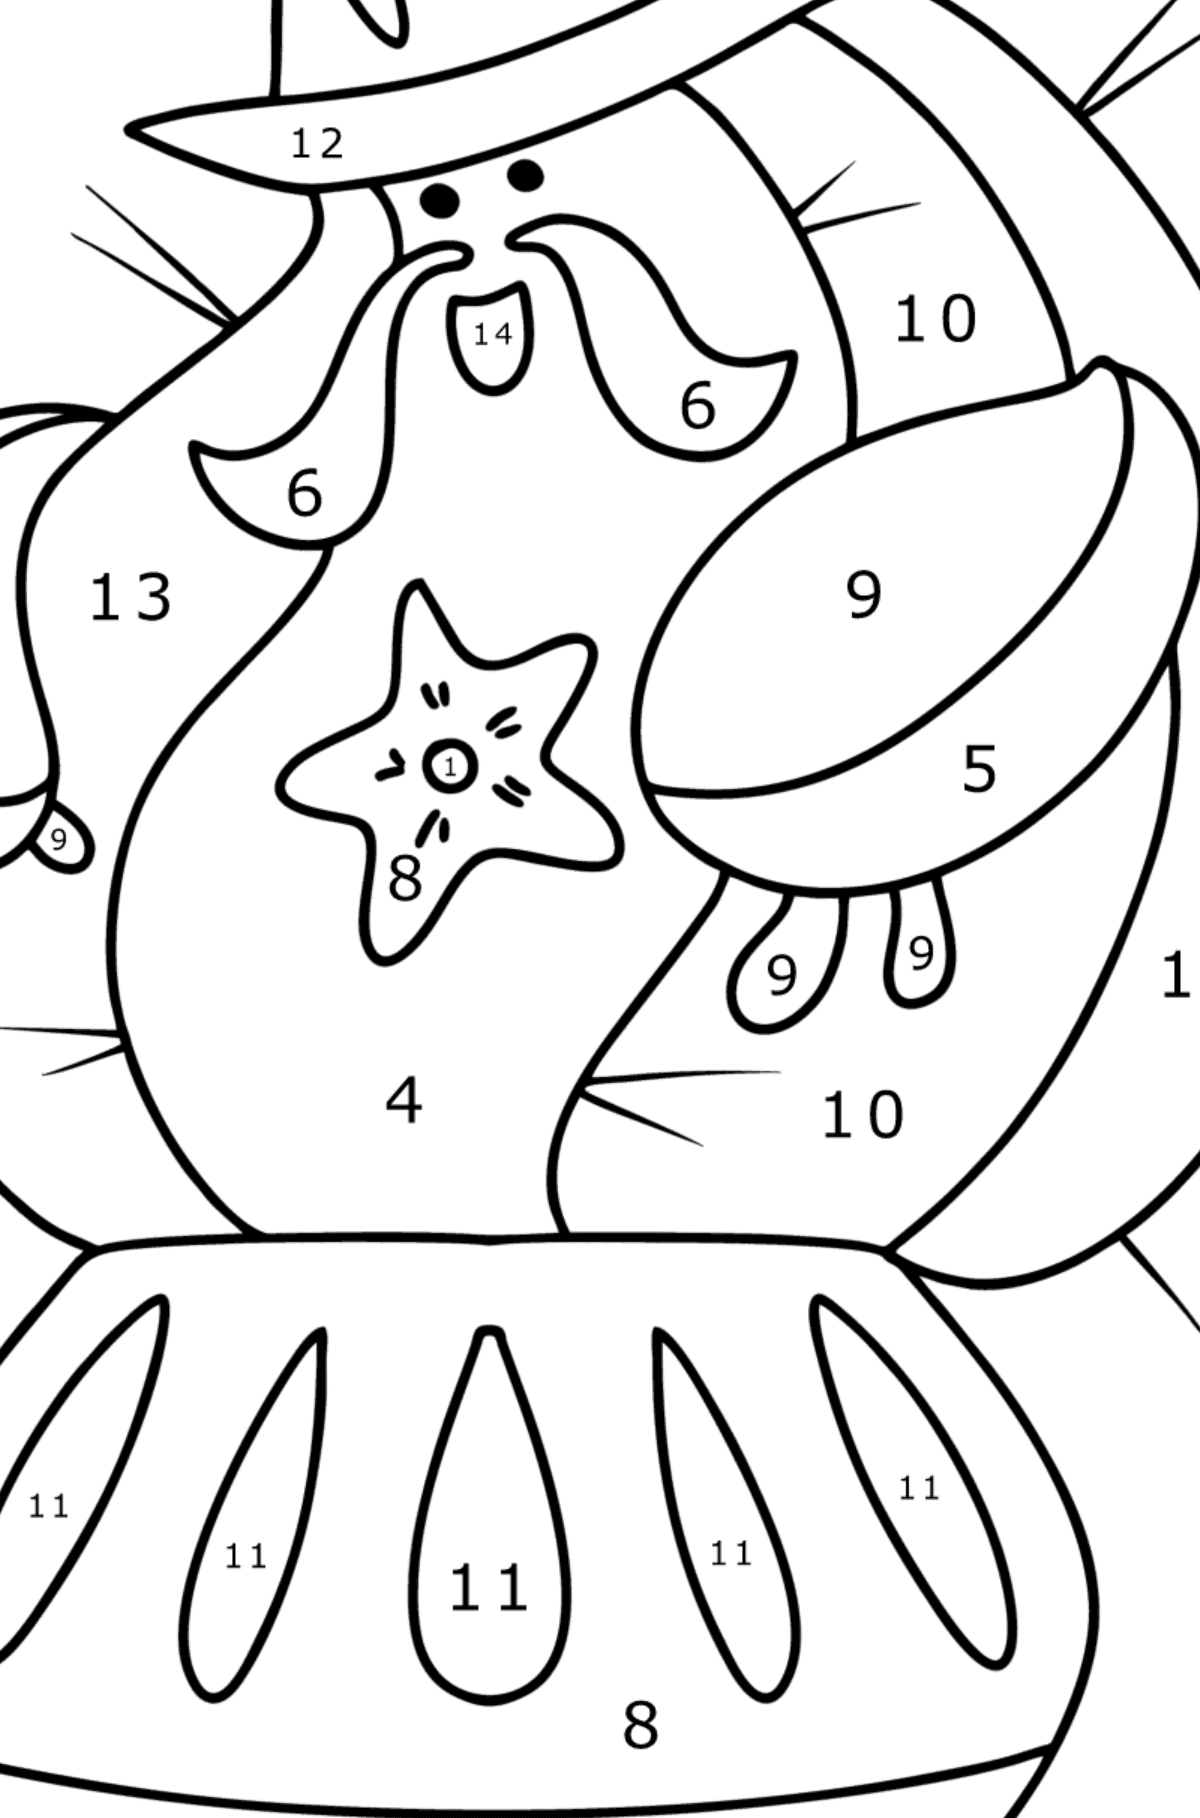 Sheriff Cactus coloring page - Coloring by Numbers for Kids